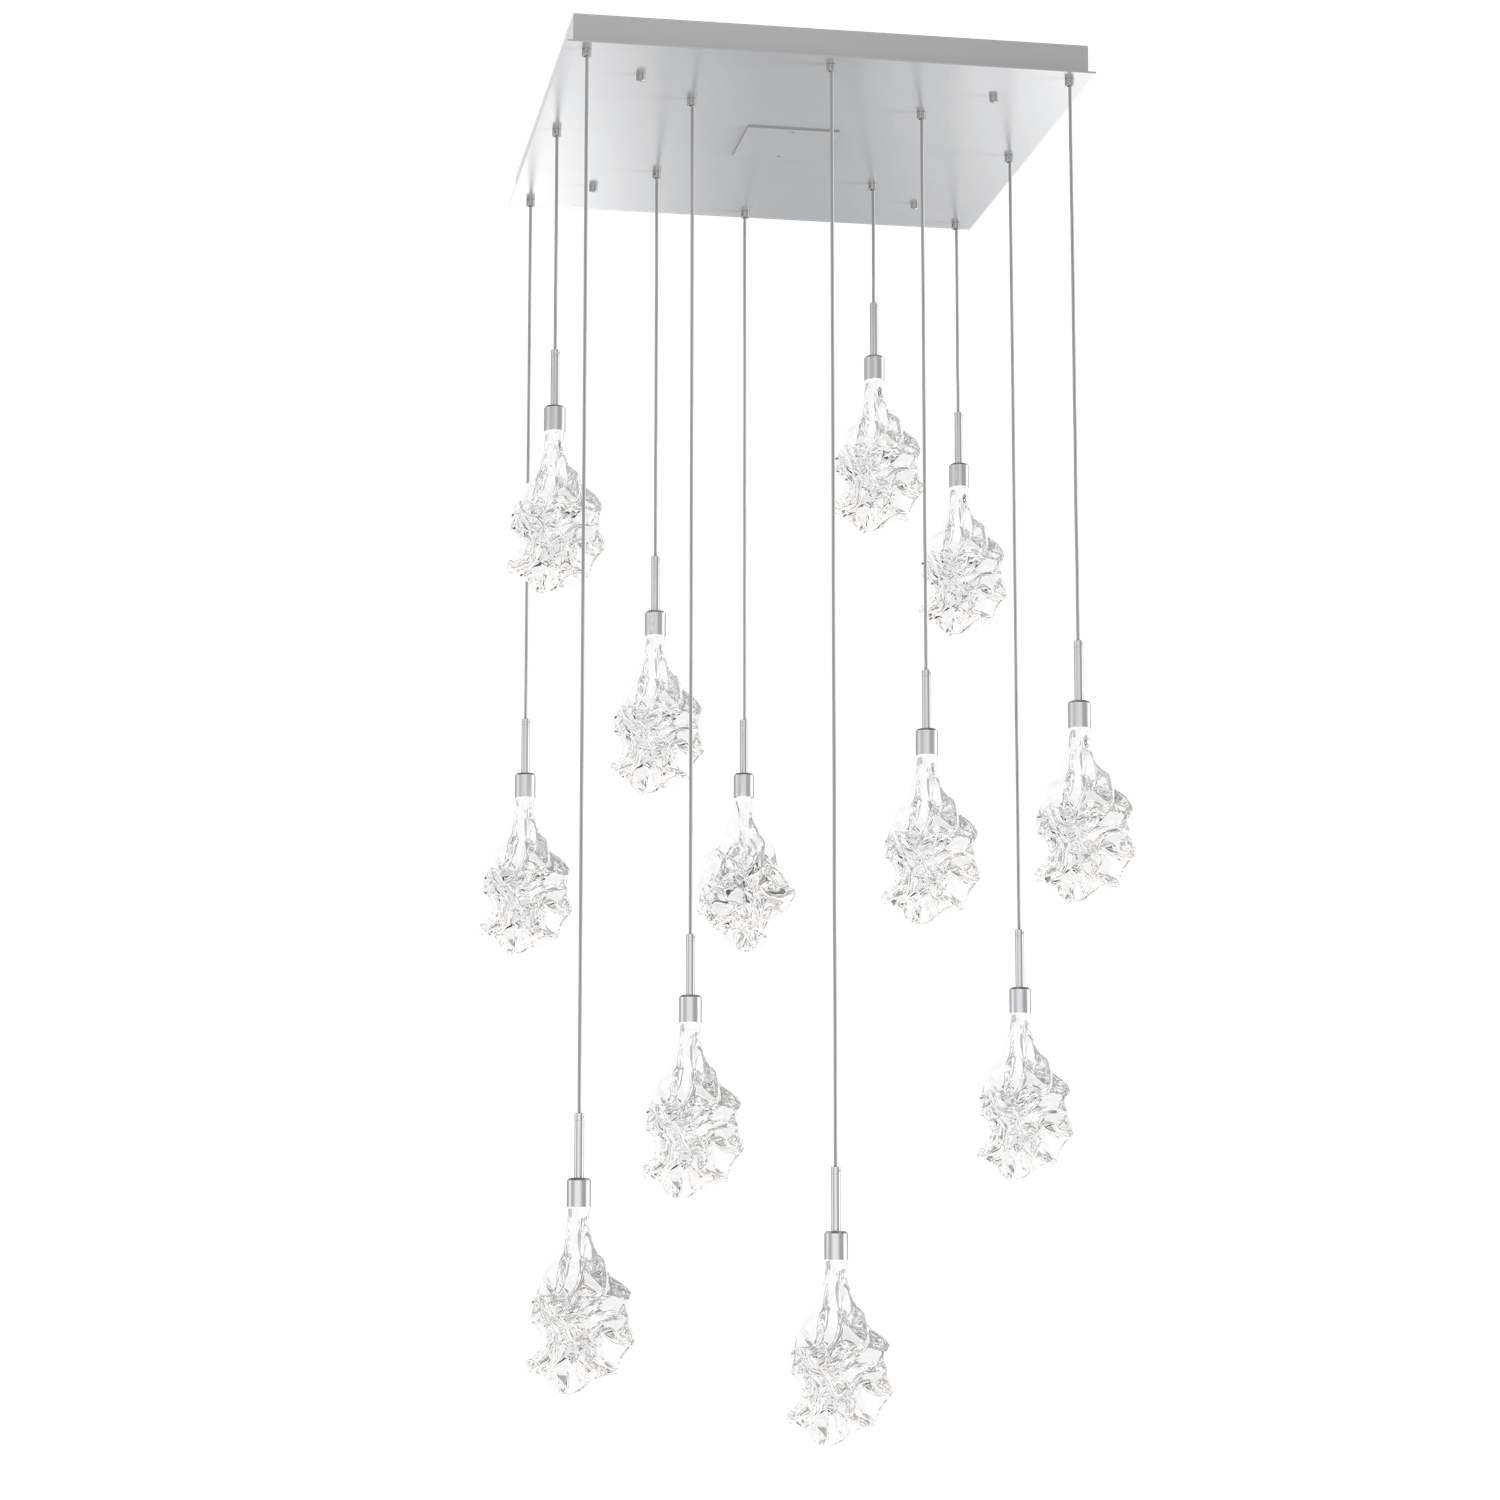 CHB0059-12-CS-Hammerton-Studio-Blossom-12-light-square-pendant-chandelier-with-classic-silver-finish-and-clear-handblown-crystal-glass-shades-and-LED-lamping